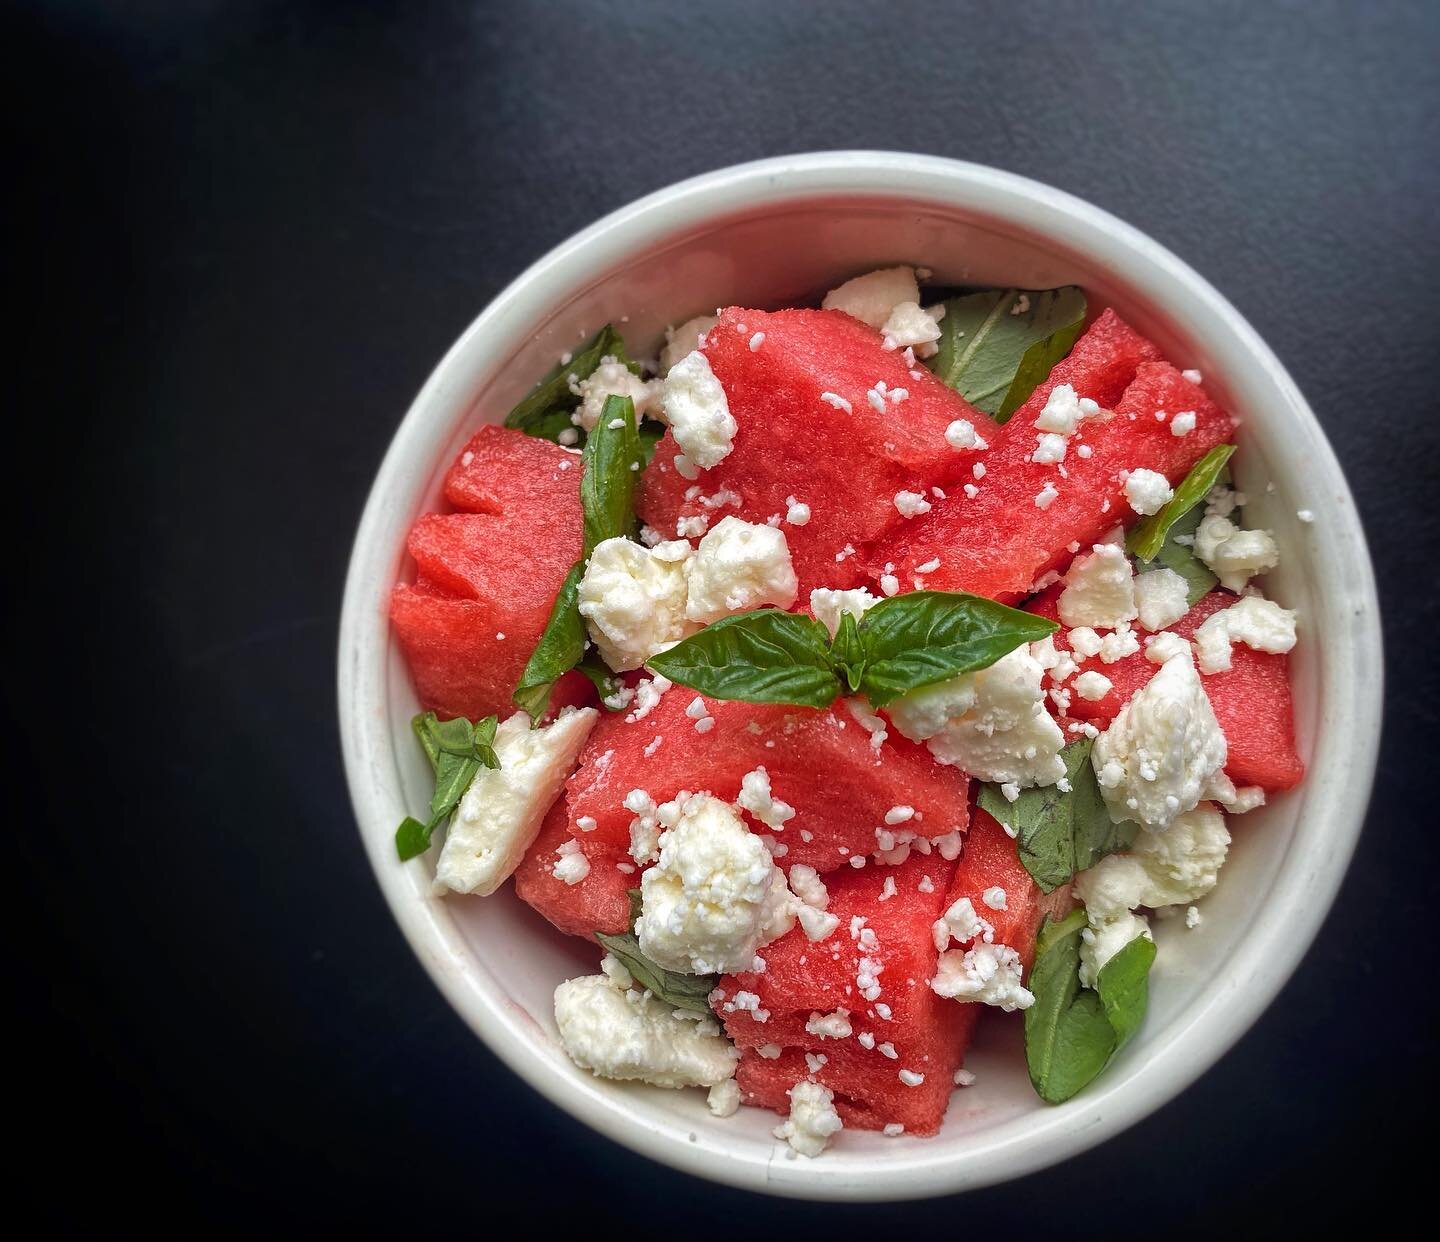 Watermelon, mint, and feta side salad returns this week!  We also have $10 pimento burger specials, $5 drafts, and $2 Domestics tonight with our weekly FREE open mic! 

See you at the Reeves!

#reeves #reevestheater #elkinnc #yadkinvalley #livemusic 